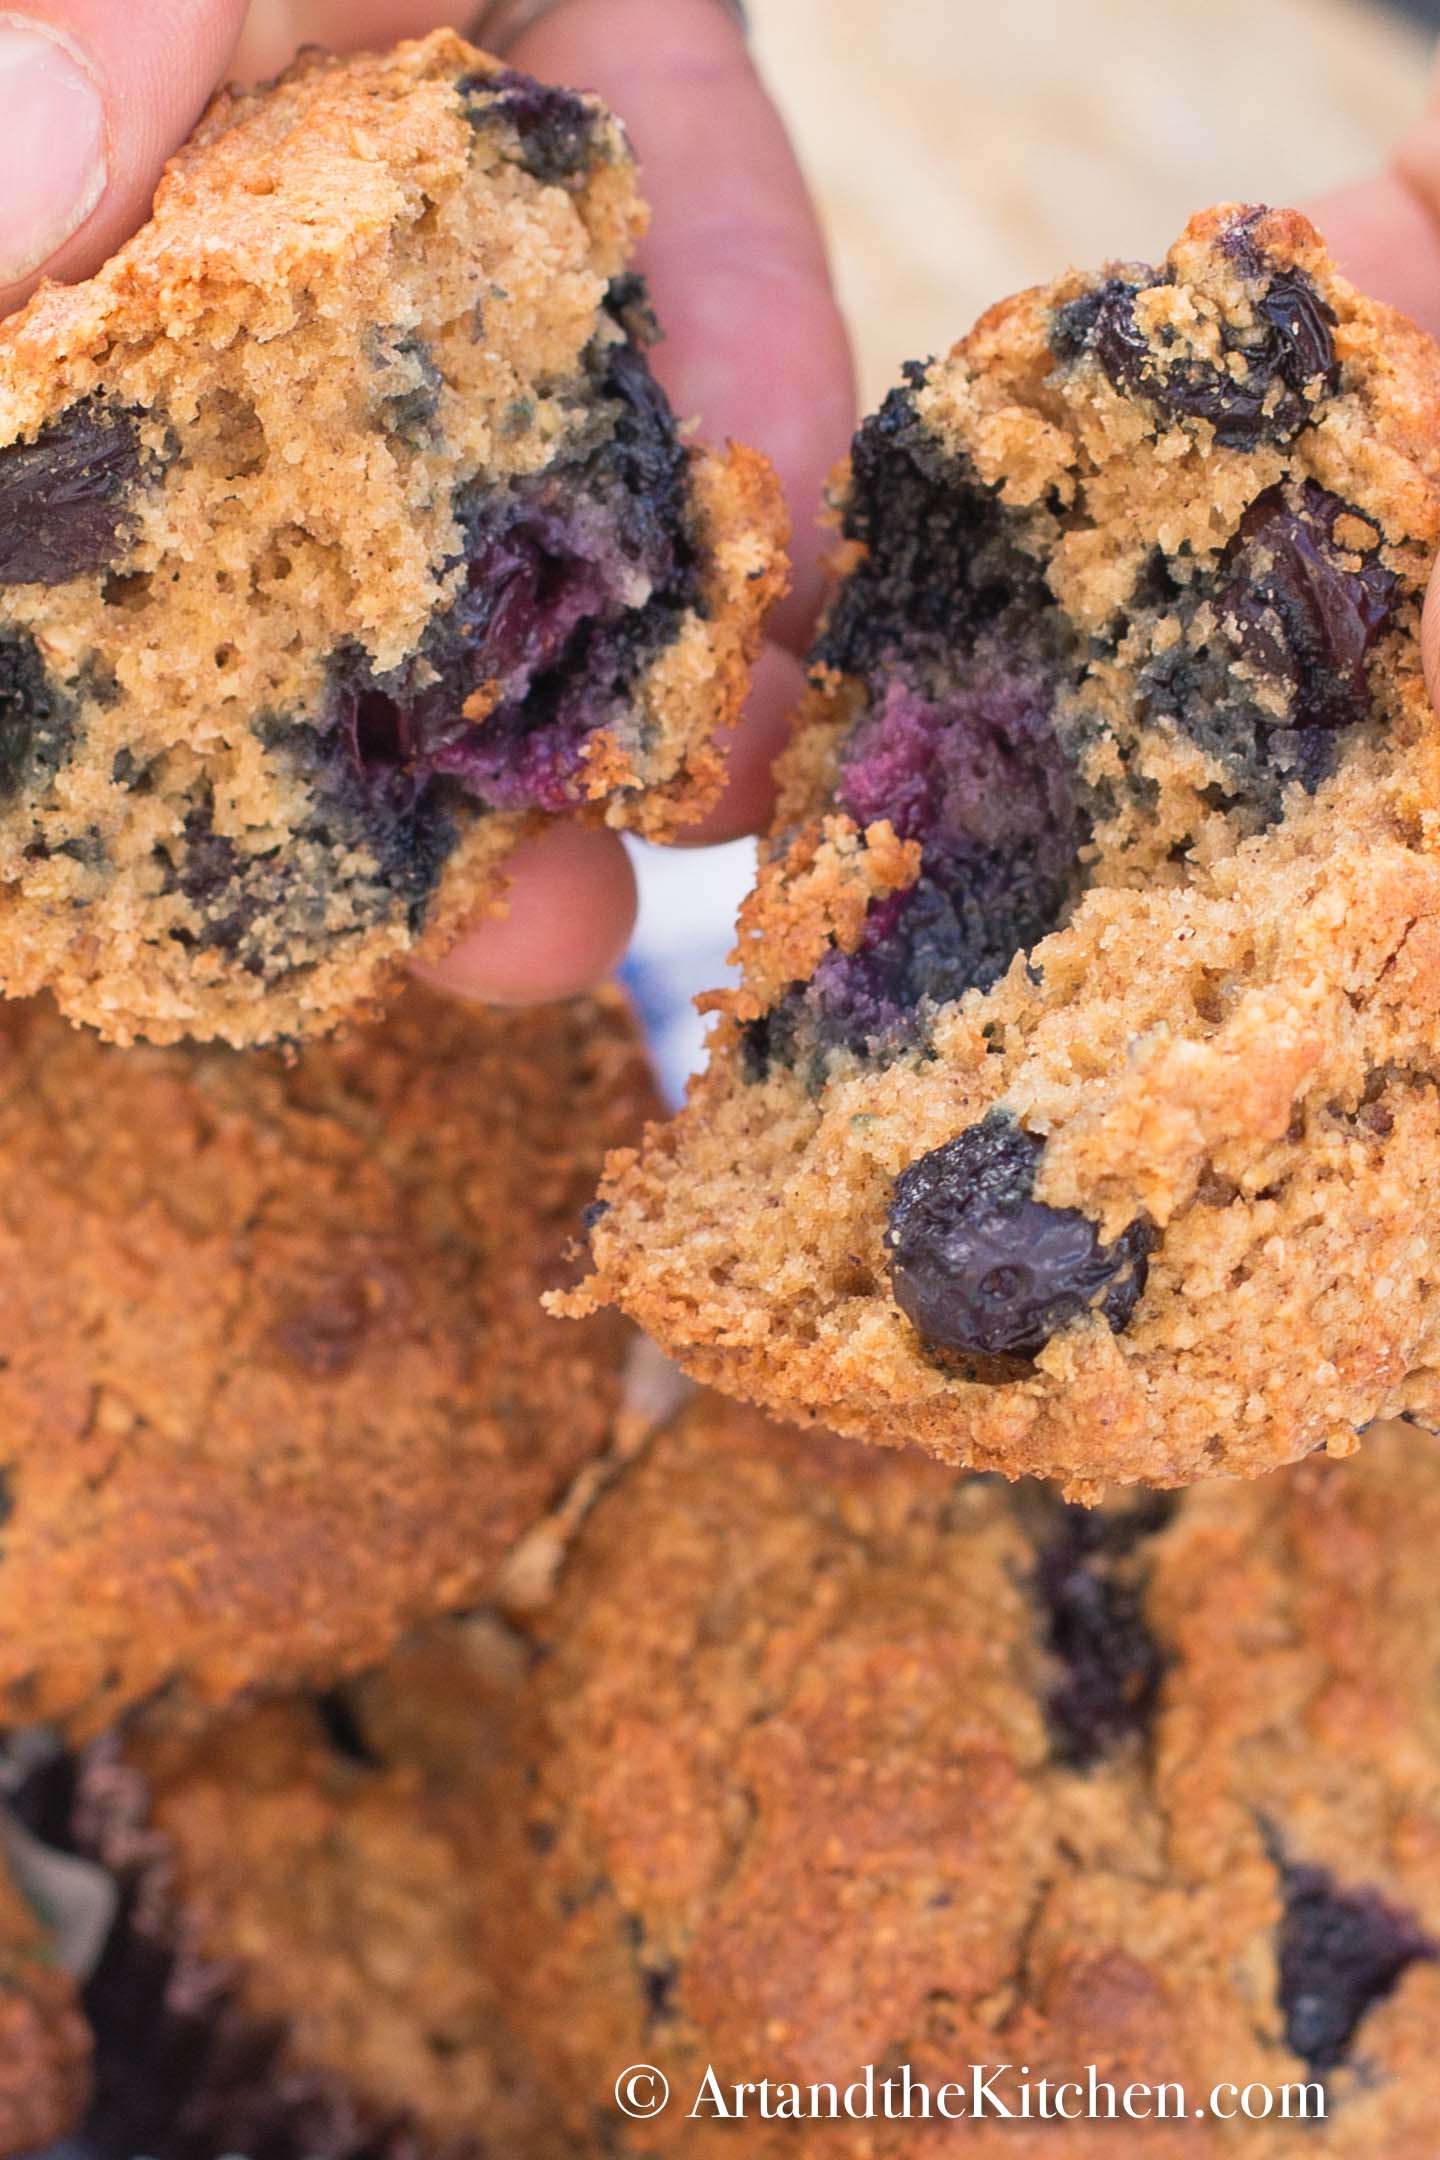 Stack of blueberry bran muffins pulling apart one muffin to show inside.